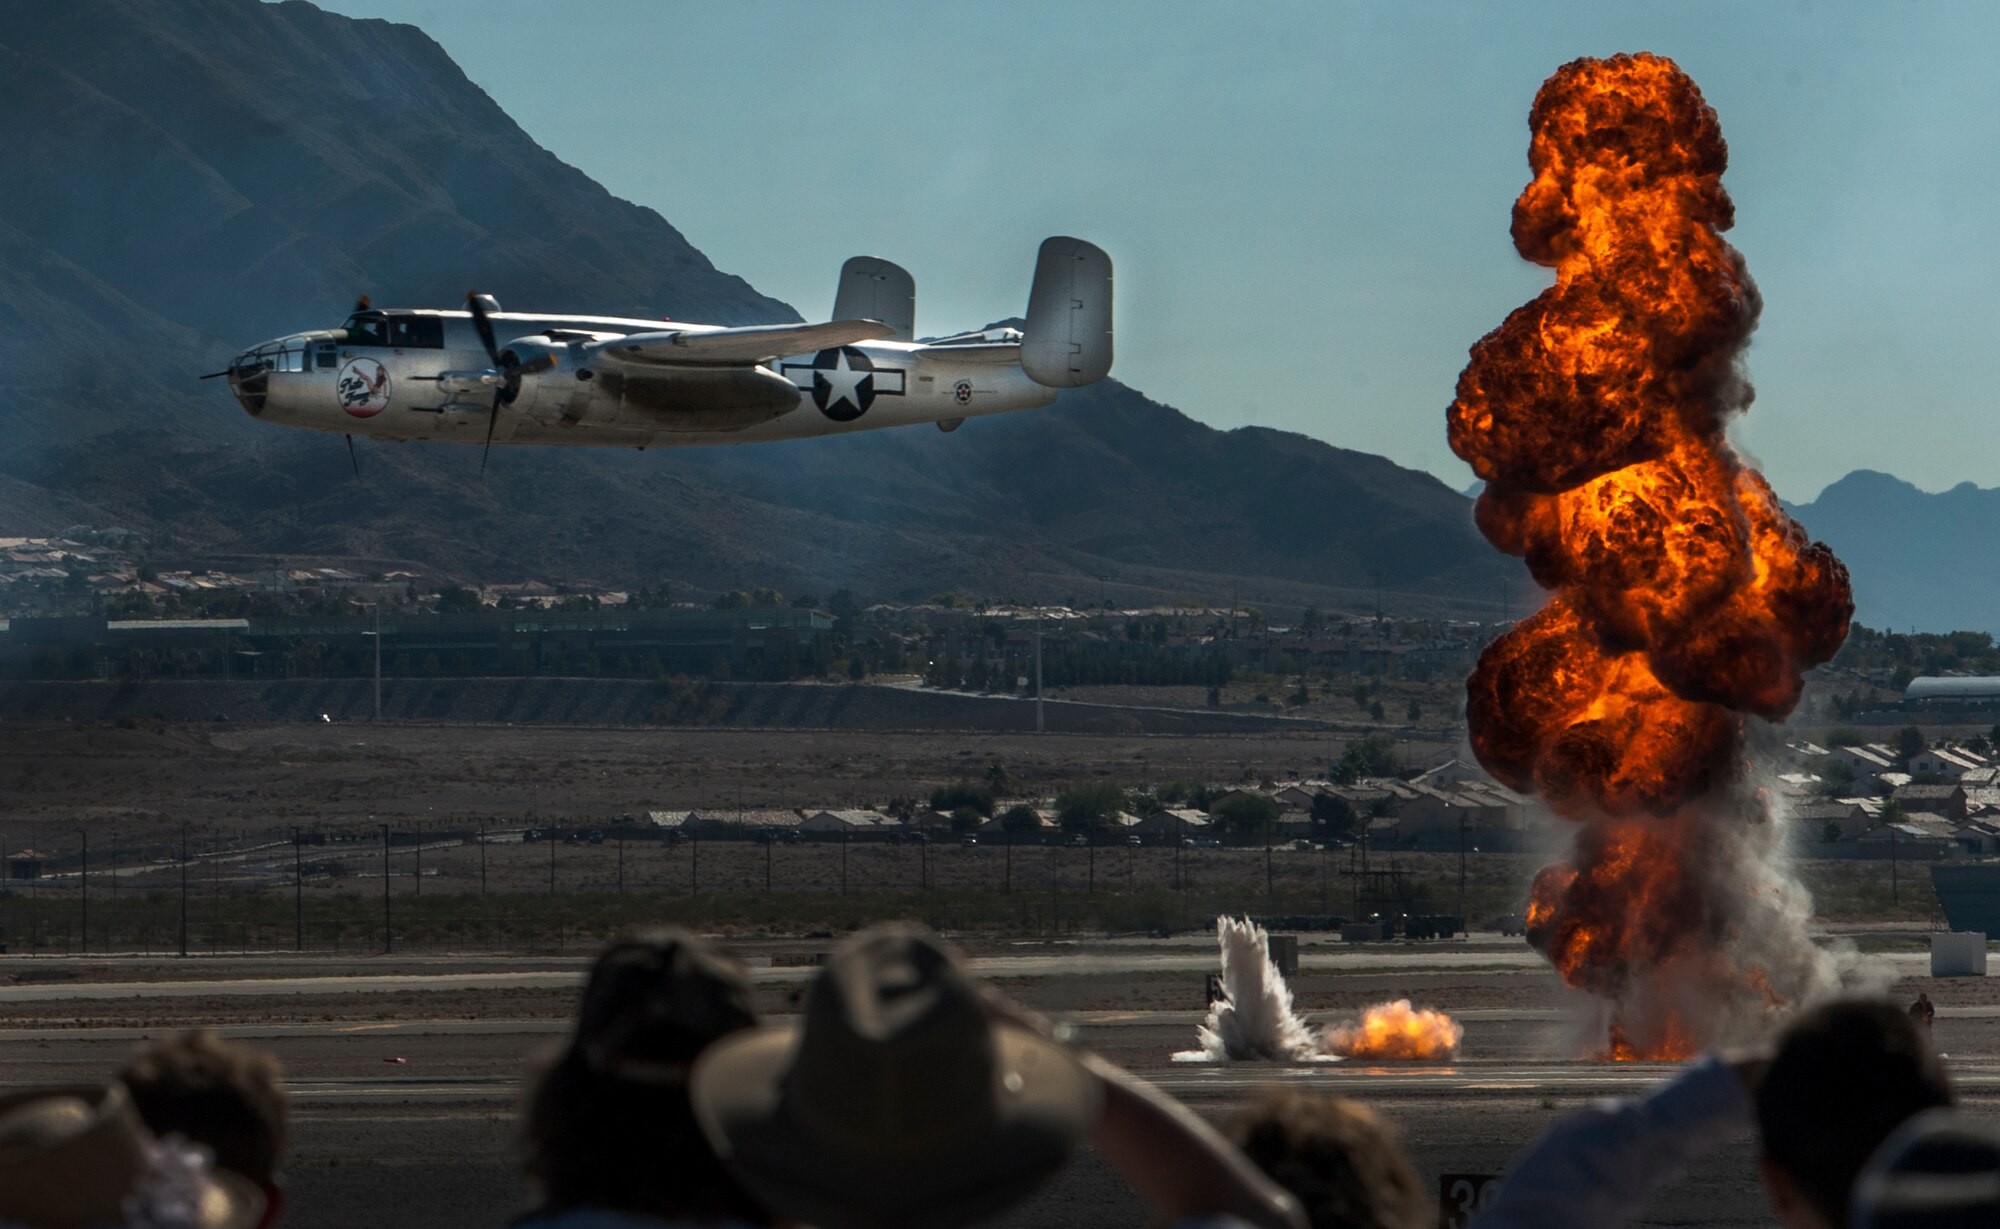 An aircraft flies in front of the crowd during an air-to-ground demonstration at the Aviation Nation air show on Nellis Air Force Base, Nev., Nov. 13, 2016. The many aerial acts and static aircraft displayed during the Nellis Air Show are snapshots of 75 years of aviation history. (U.S. Air Force photo by Airman 1st Class Kevin Tanenbaum/Released)